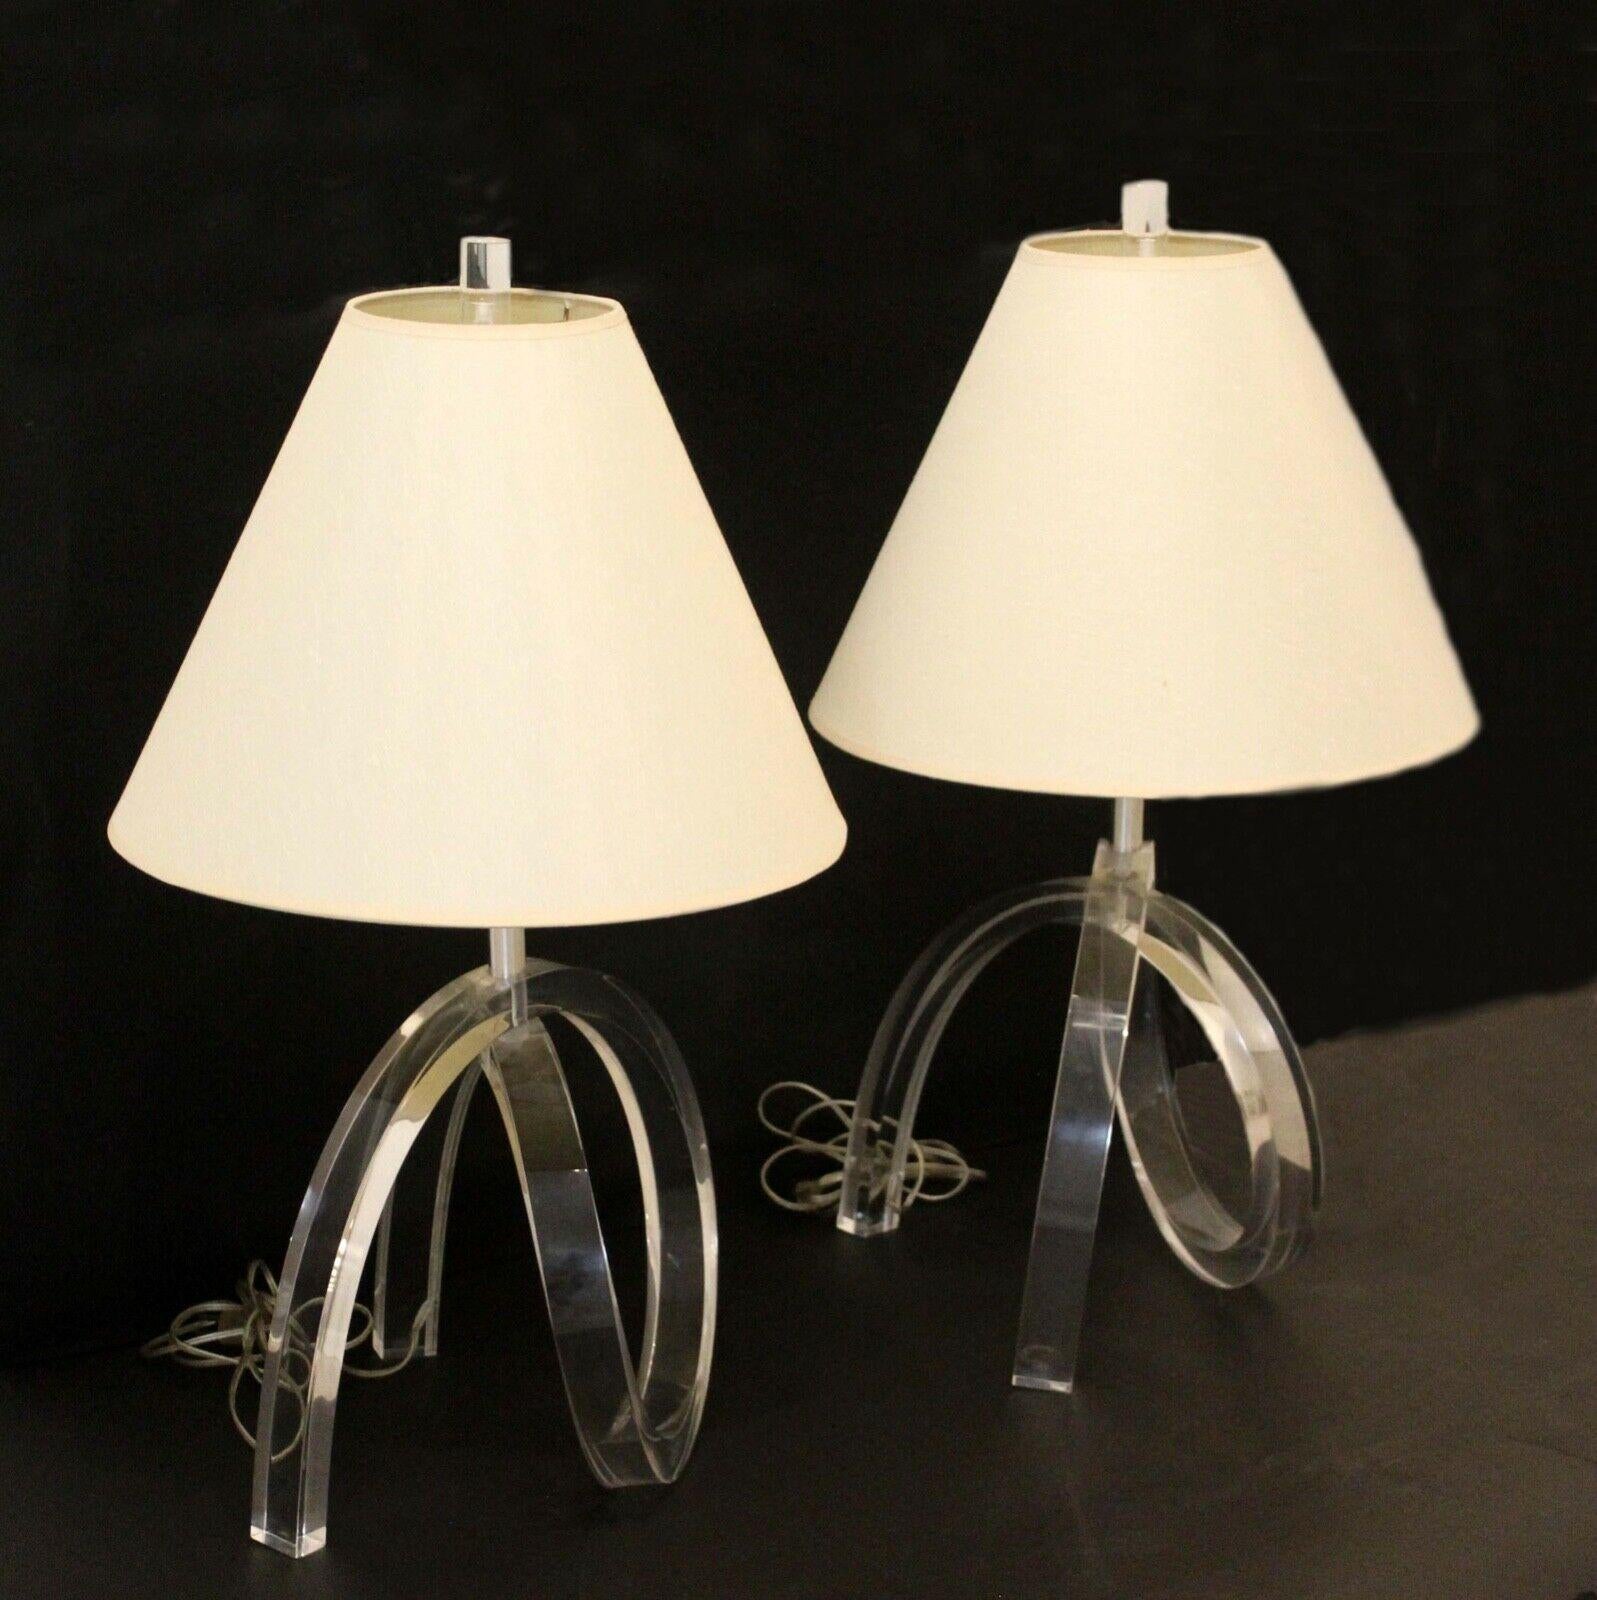 This stunning pair of clear, lucite table lamps with original finials were designed by Herb Ritz and Astrolite, Los Angeles and referred to as the 'pretzel' lamp. In good vintage condition with little or no imperfections.
 